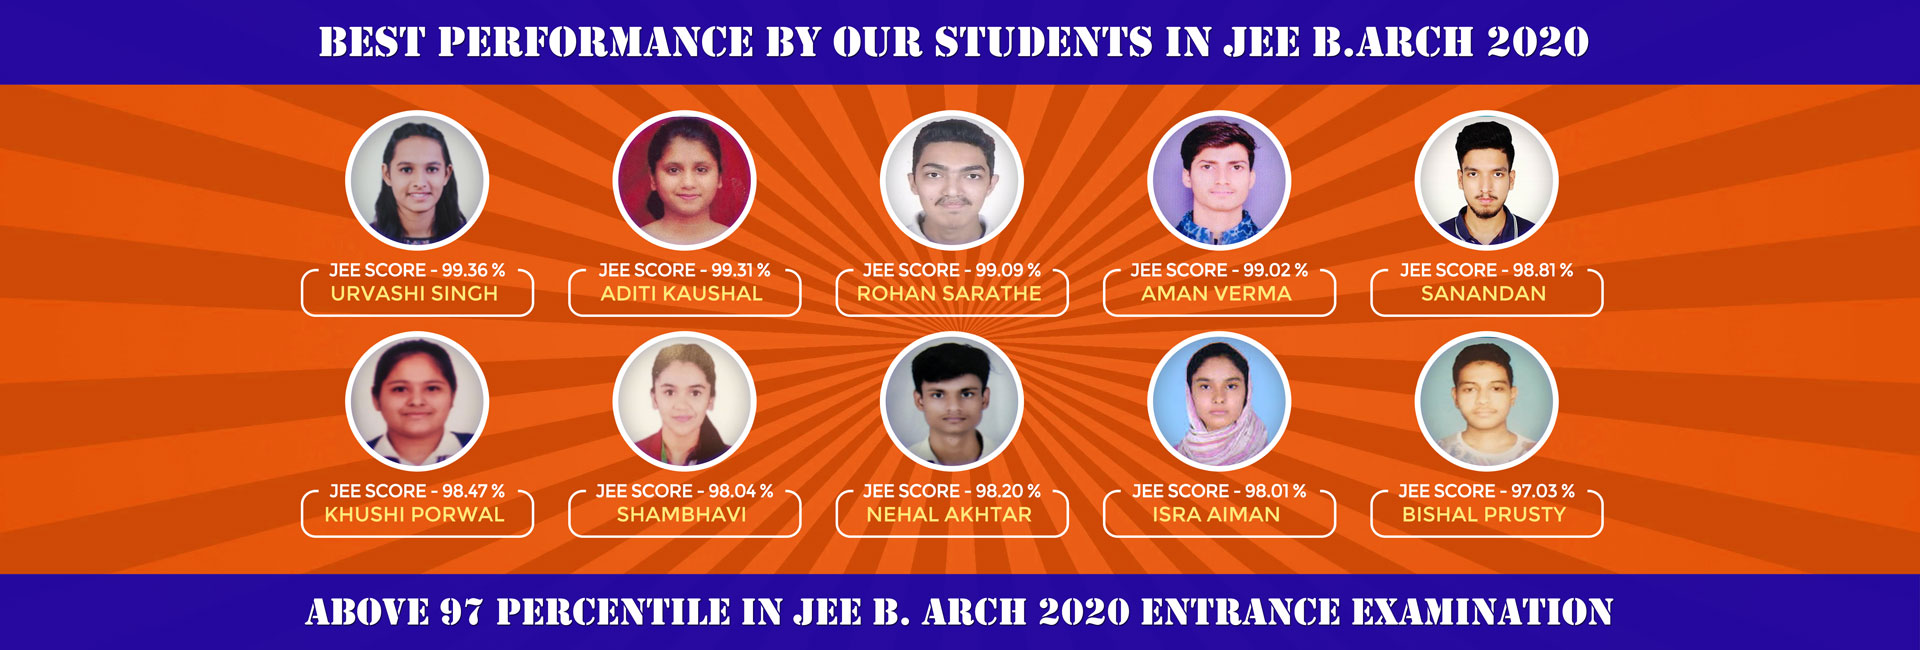 JEE 2020 top students